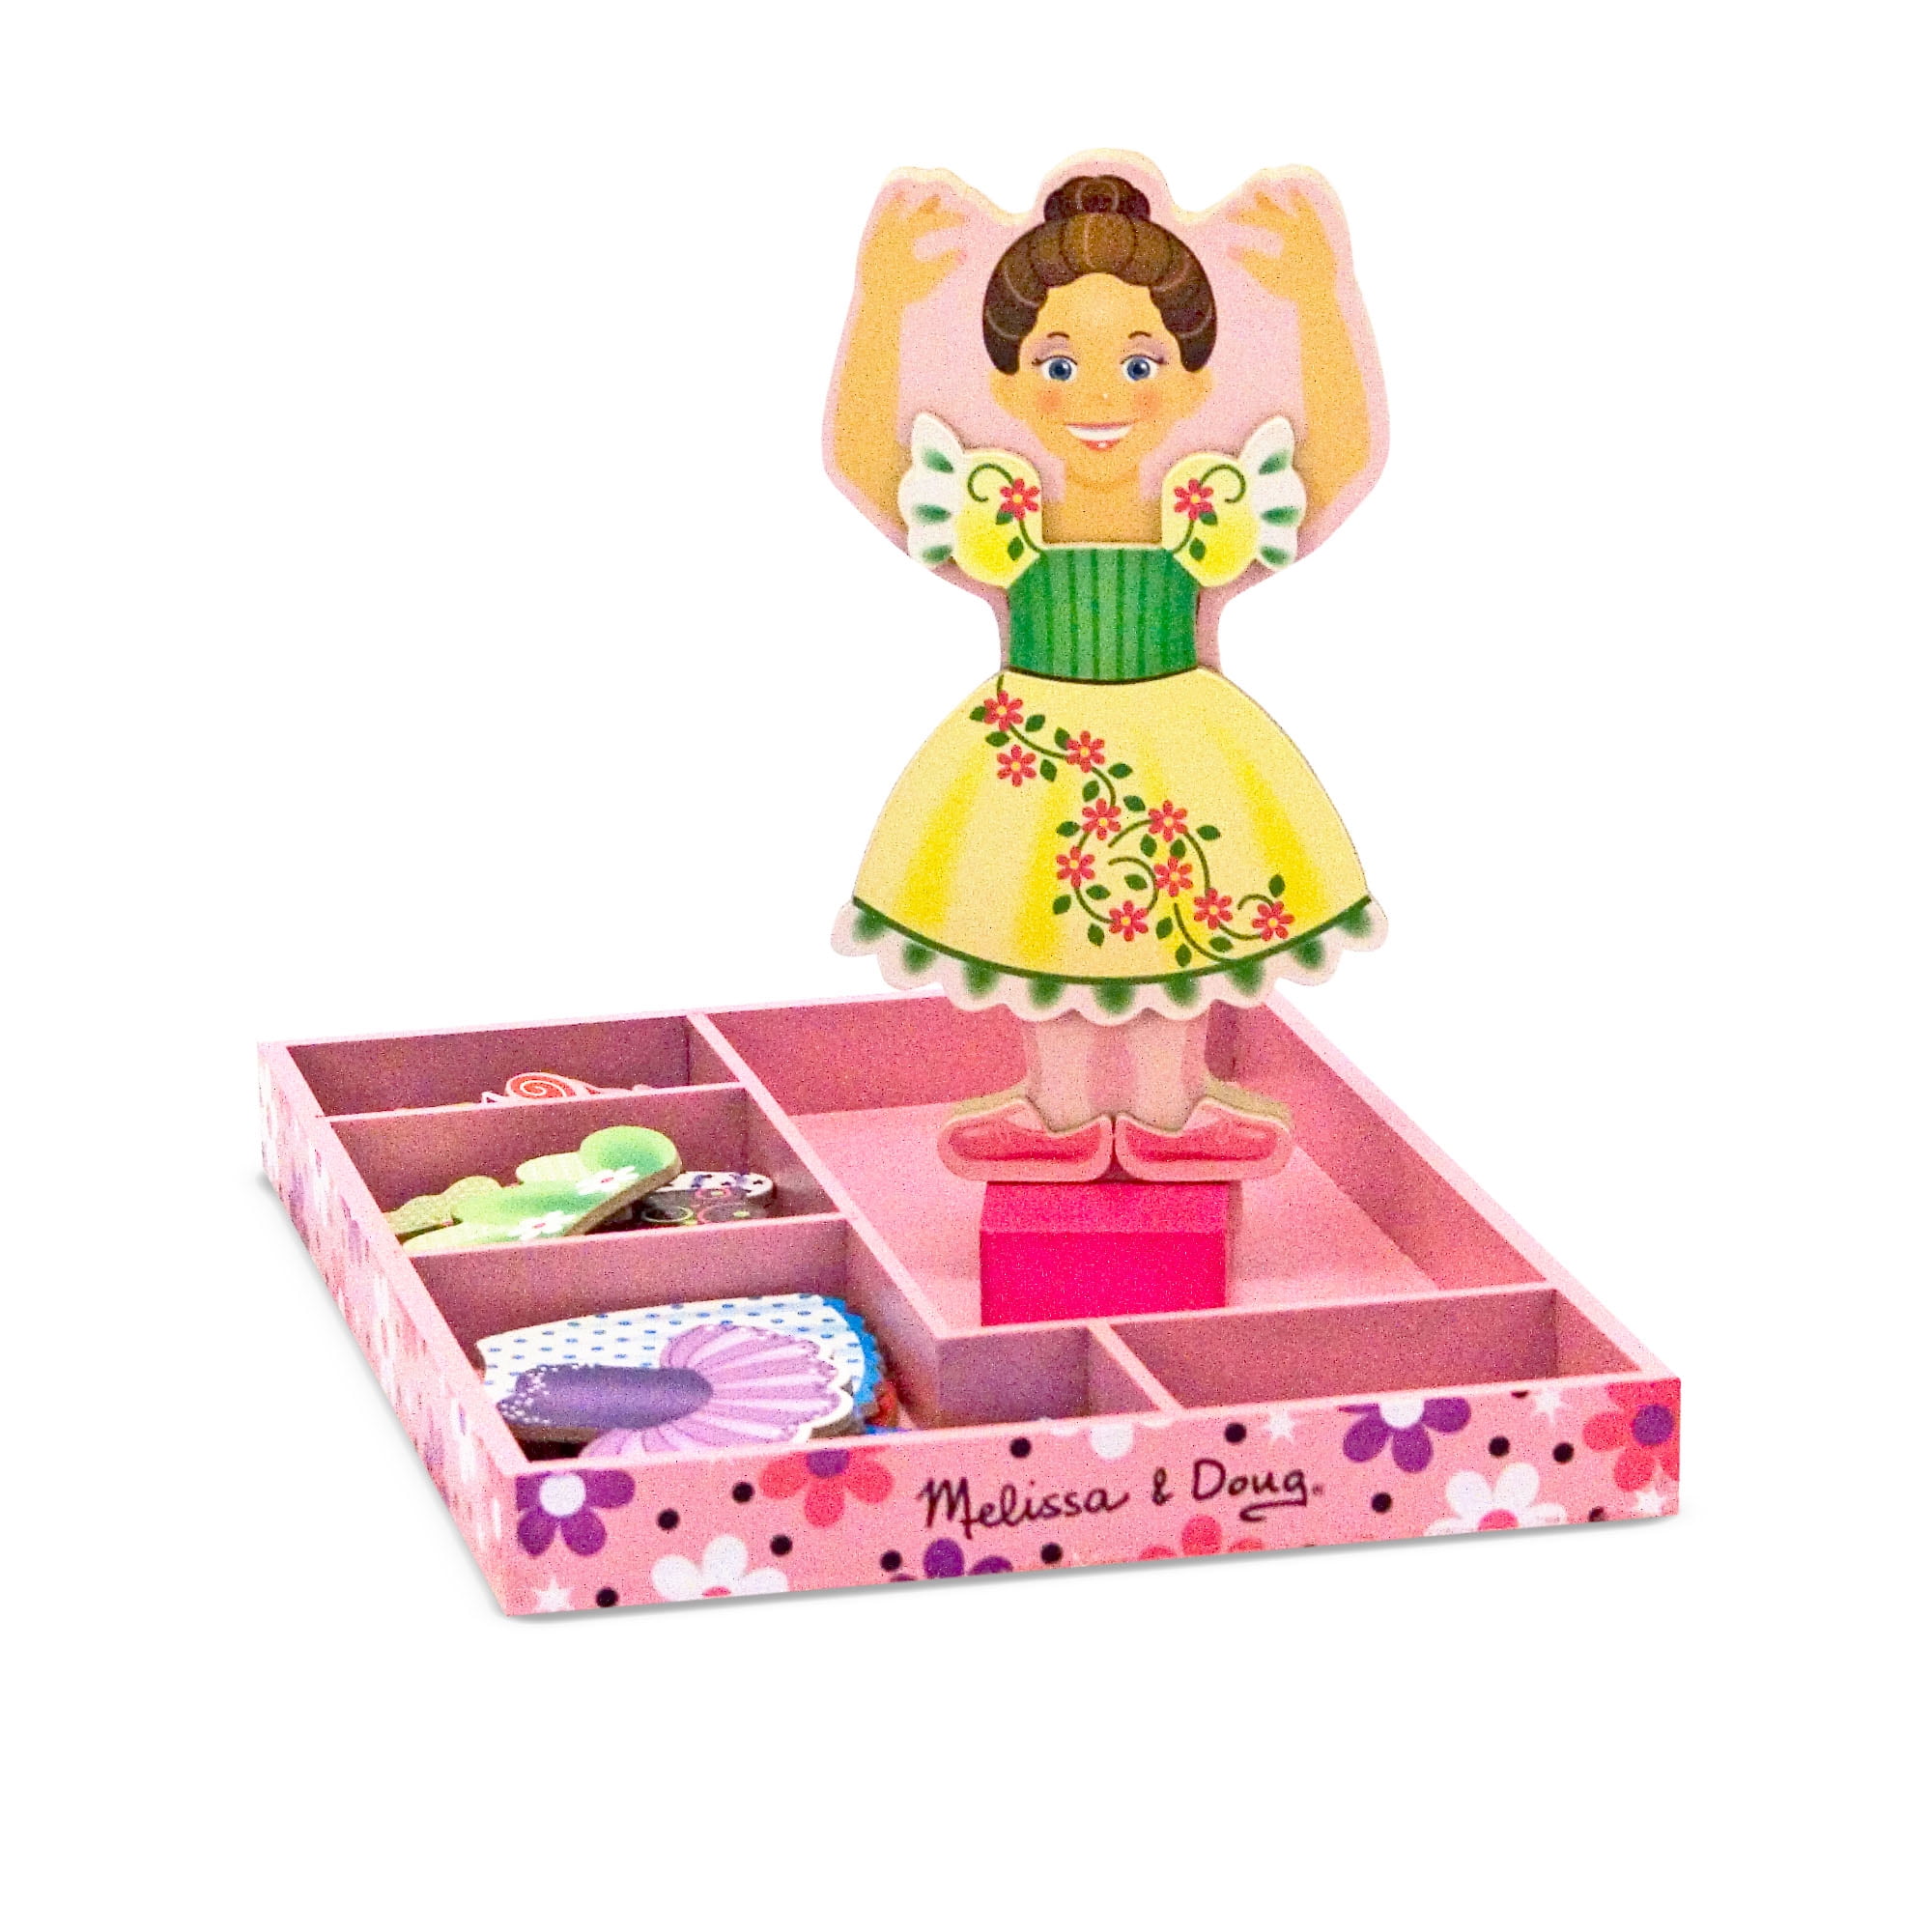 Melissa & Doug Classic Magnetic Wooden Dress-Up Dolls In Wooden Case